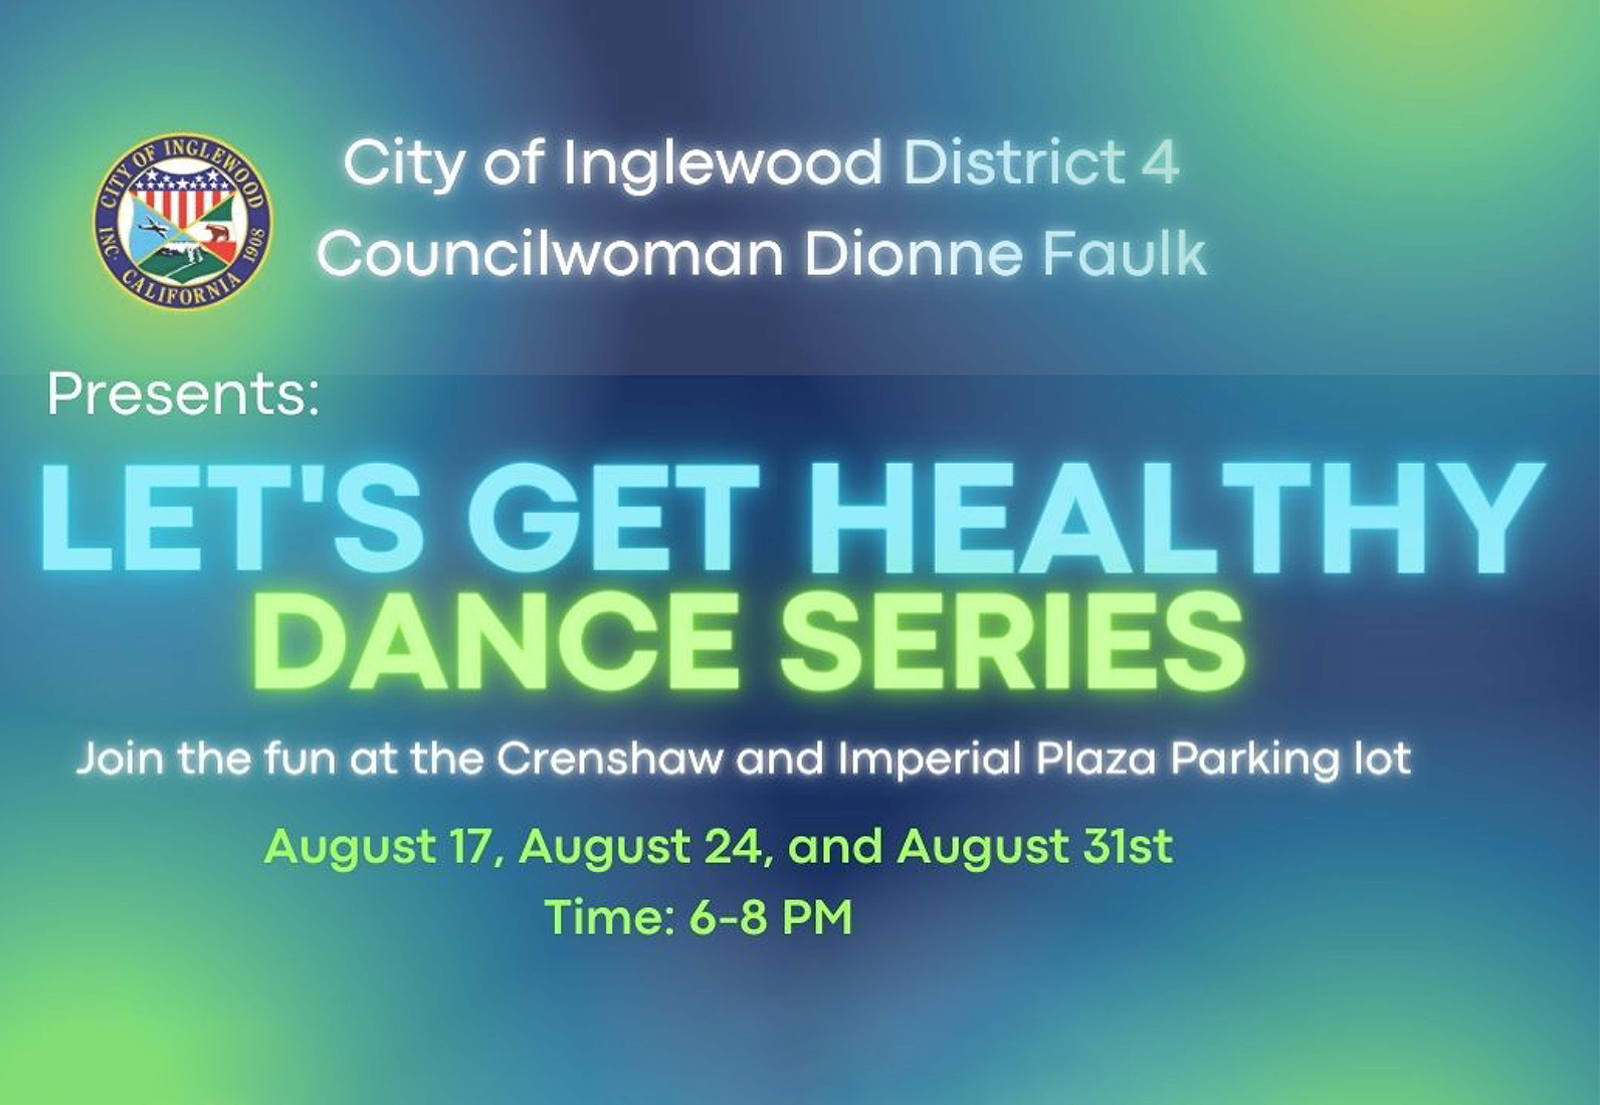 Let’s Get Healthy Dance Series | Crenshaw Imperial Plaza